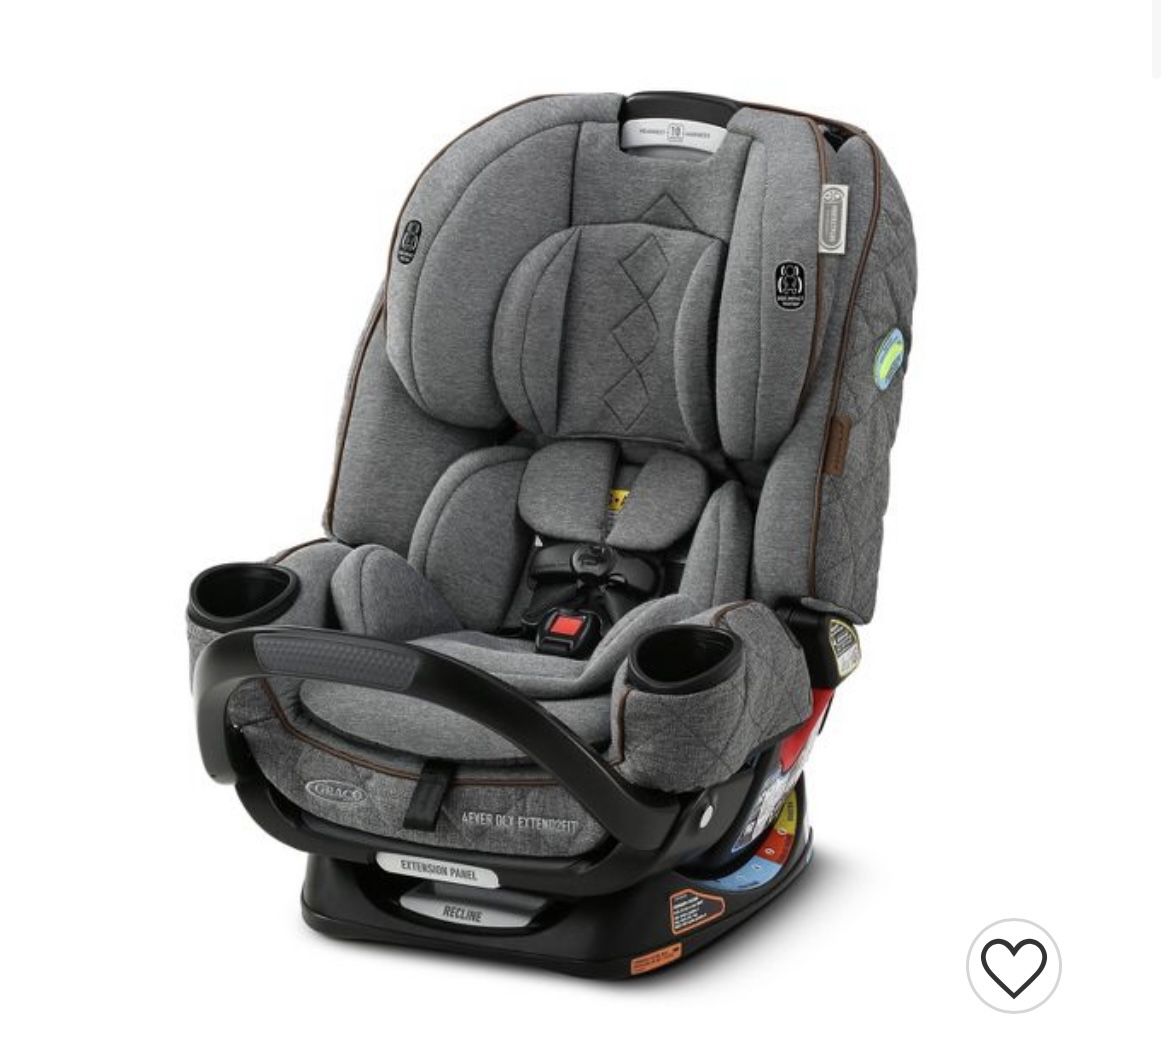 Graco Premier 4ever Dlx Extend2fit 4-in-1